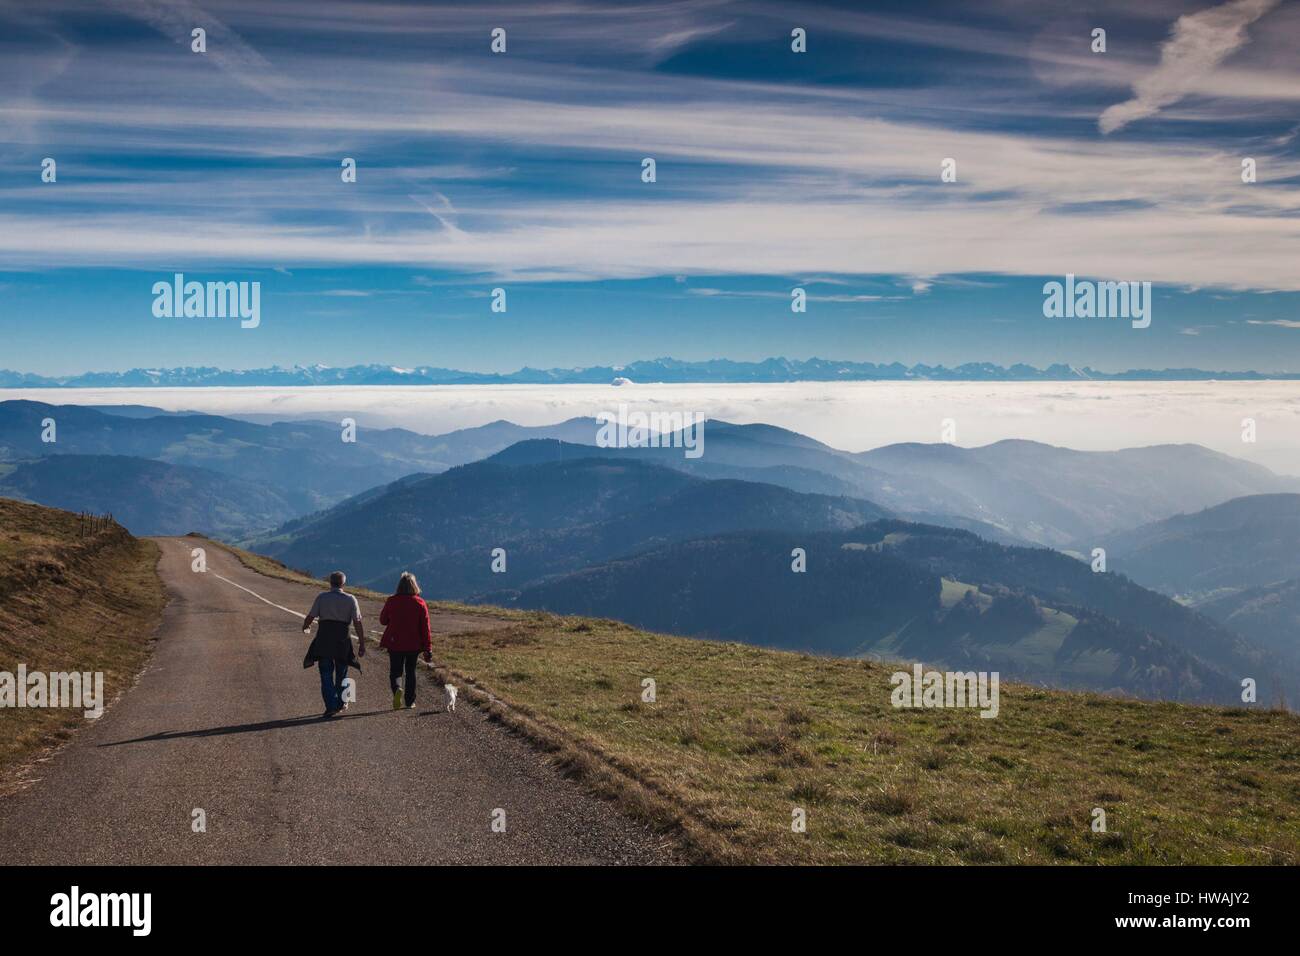 Germany, Baden-Wurttemburg, Black Forest, Belchen Mountain, summit view towards the Alps with people Stock Photo